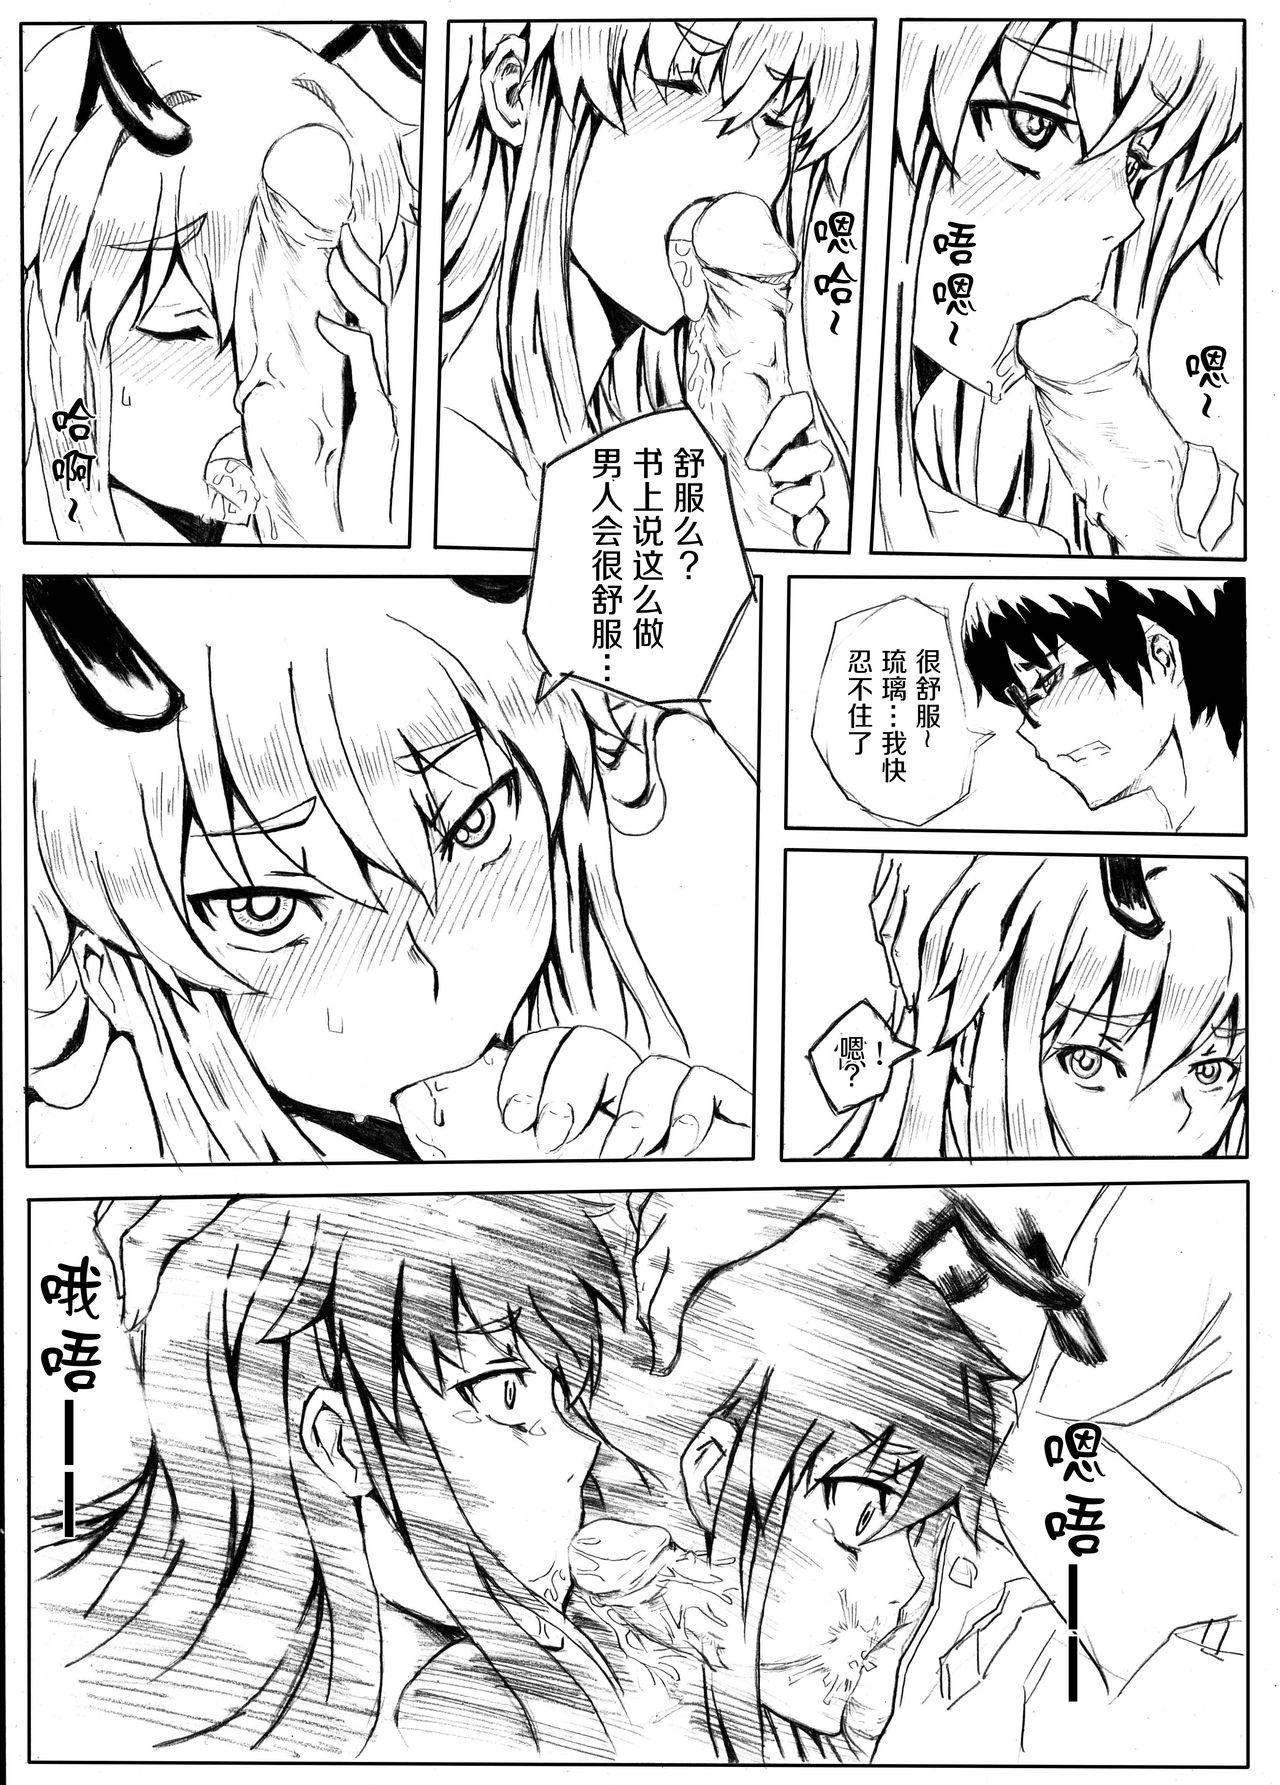 Ex Girlfriend [Shuseikan(Chinese Animation-School Shock)] Don`t Leave Me Alone 201108 [Chinese]（不想记名汉化） - School shock Ejaculations - Page 10